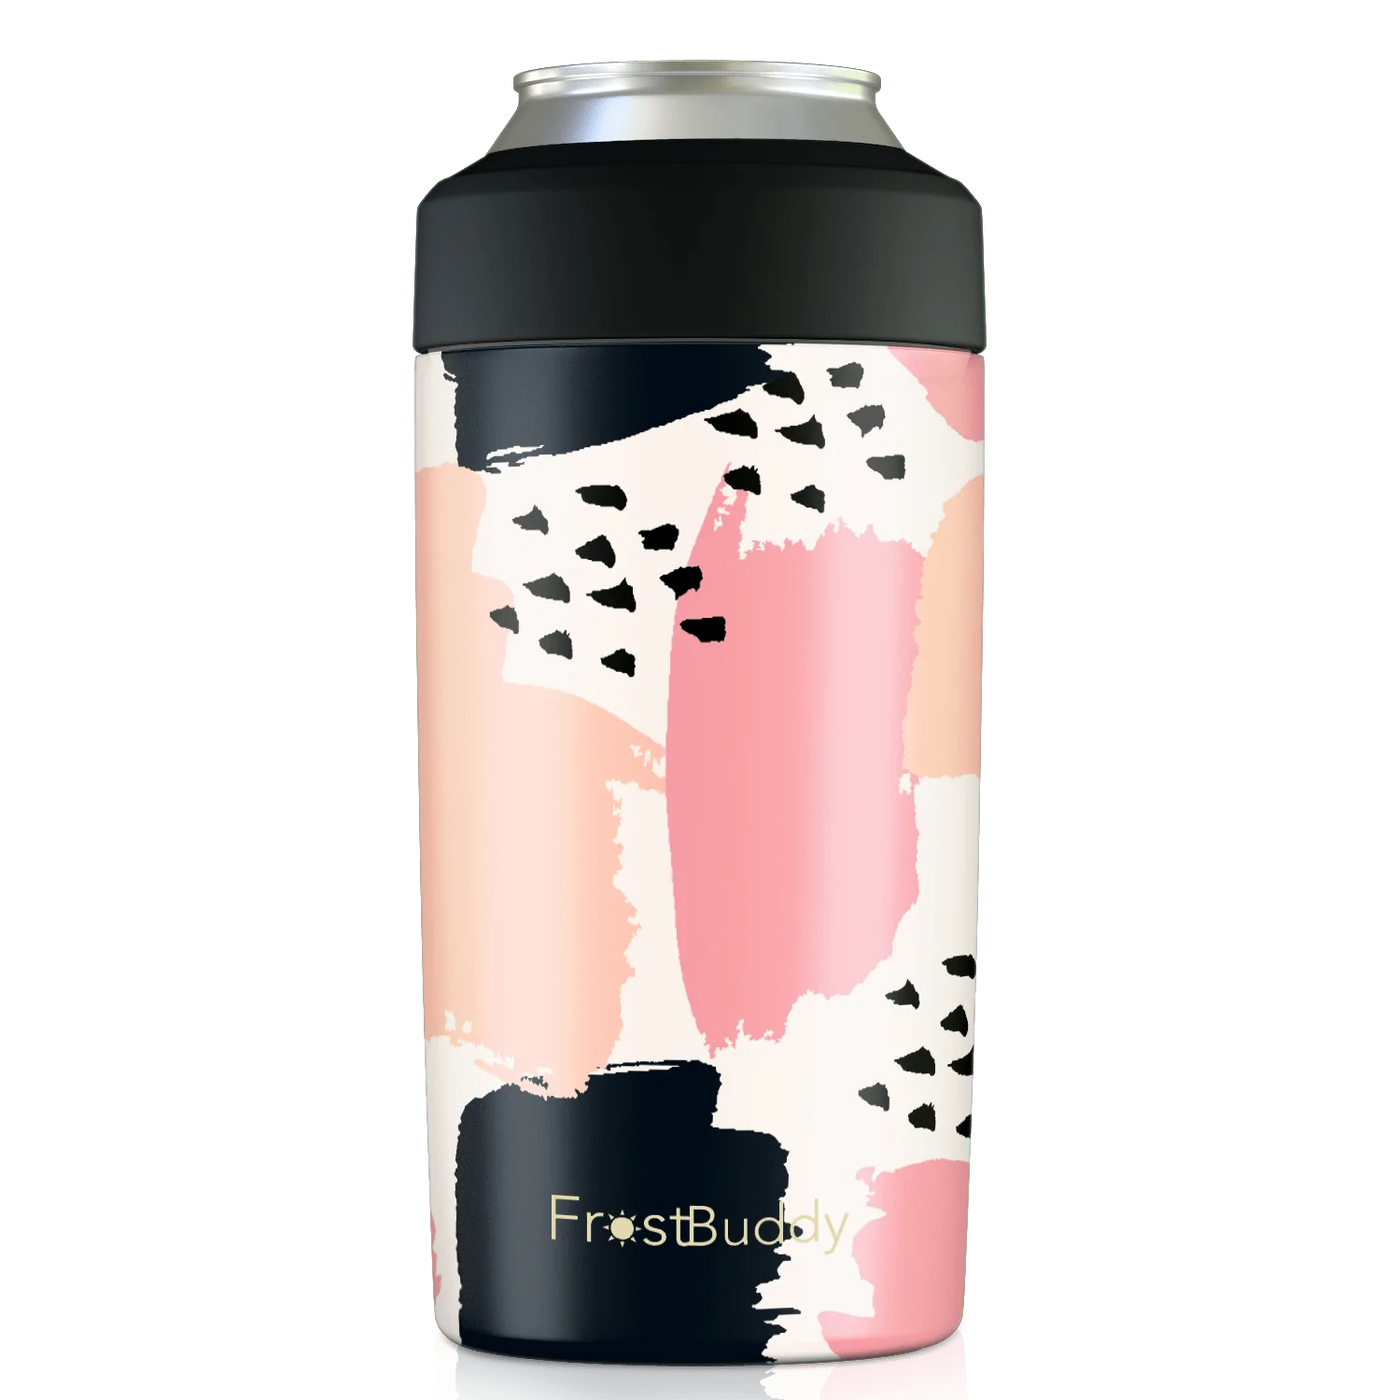 Best Seller Frost Buddy Universal Can Cooler! – Salty Chic Boutique